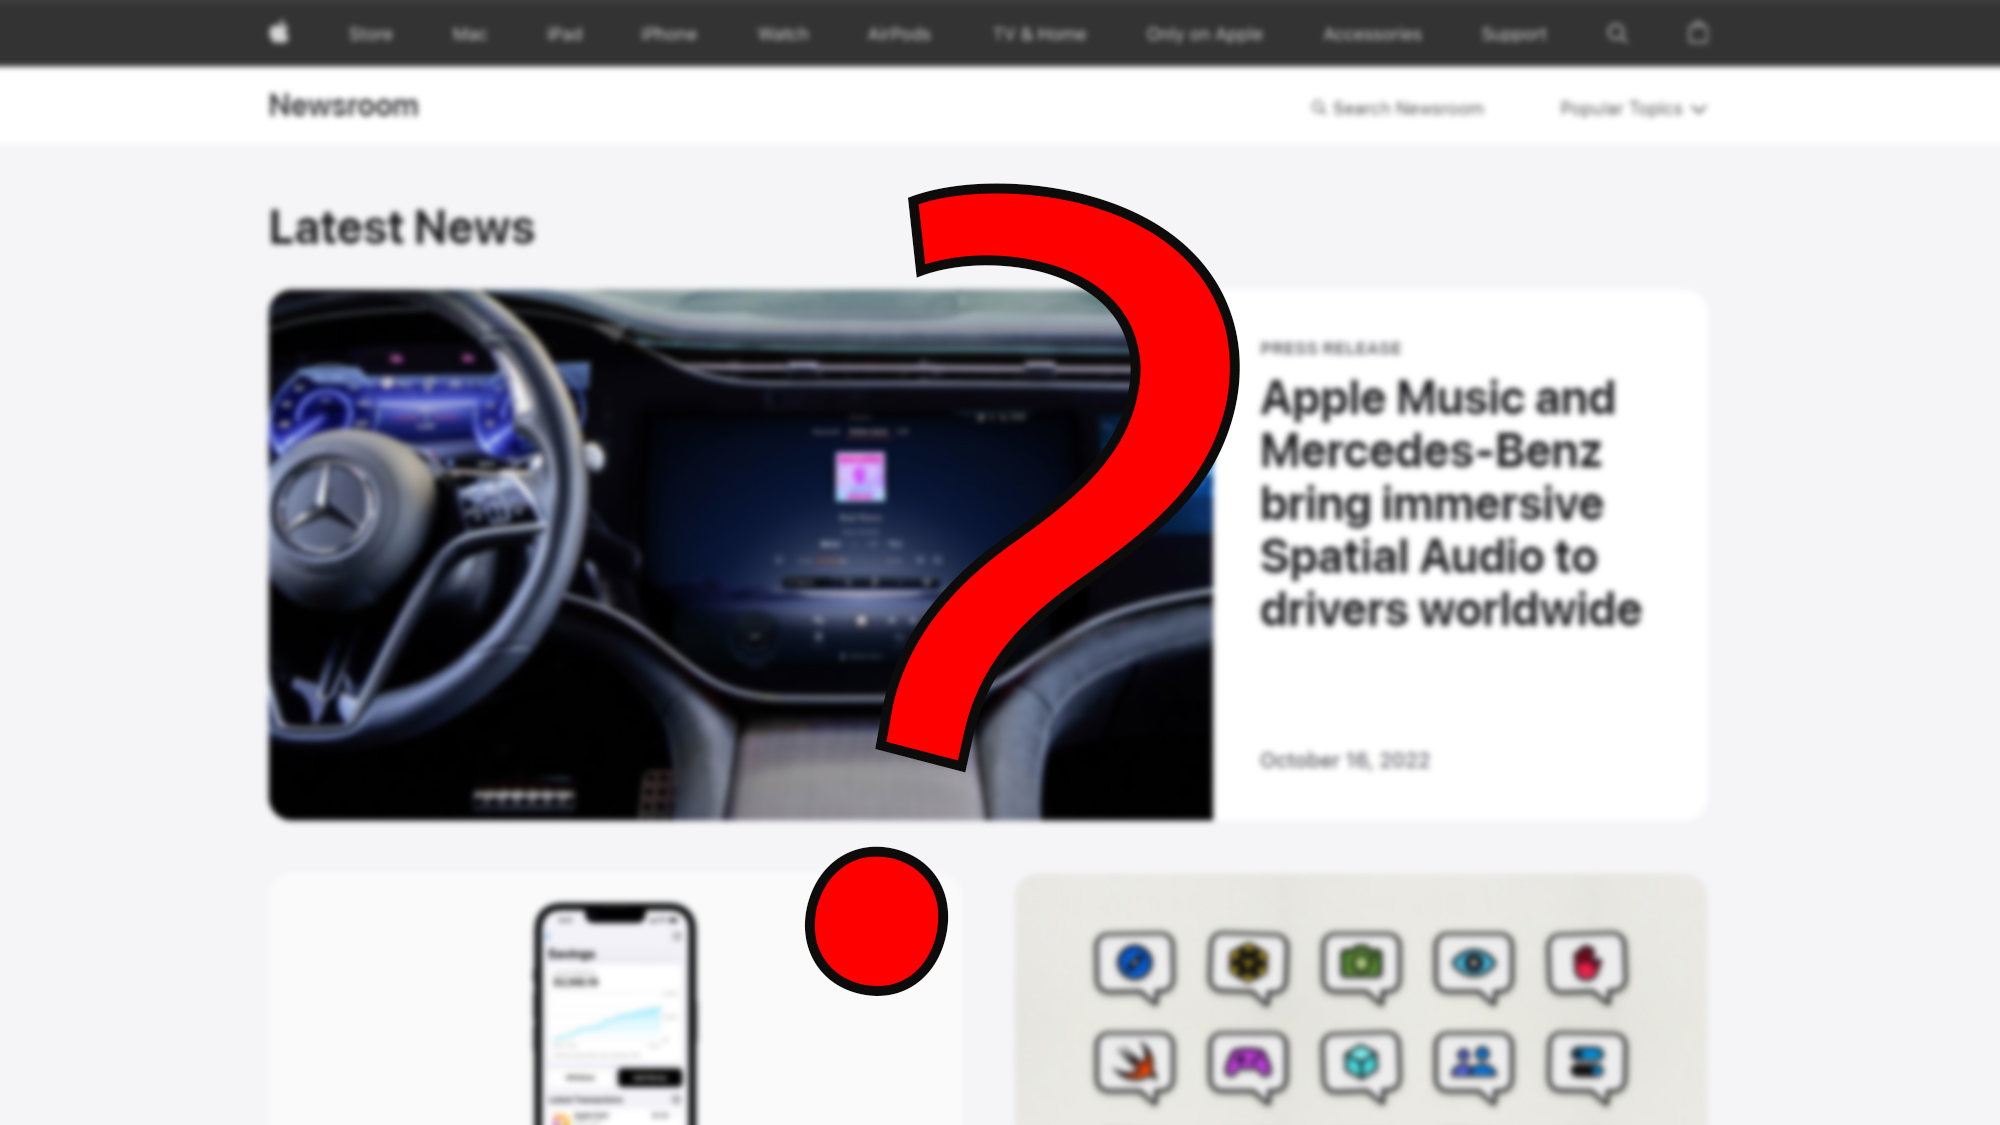 A blurred view of the Apple Newsroom webpage partially obscured by a red question mark